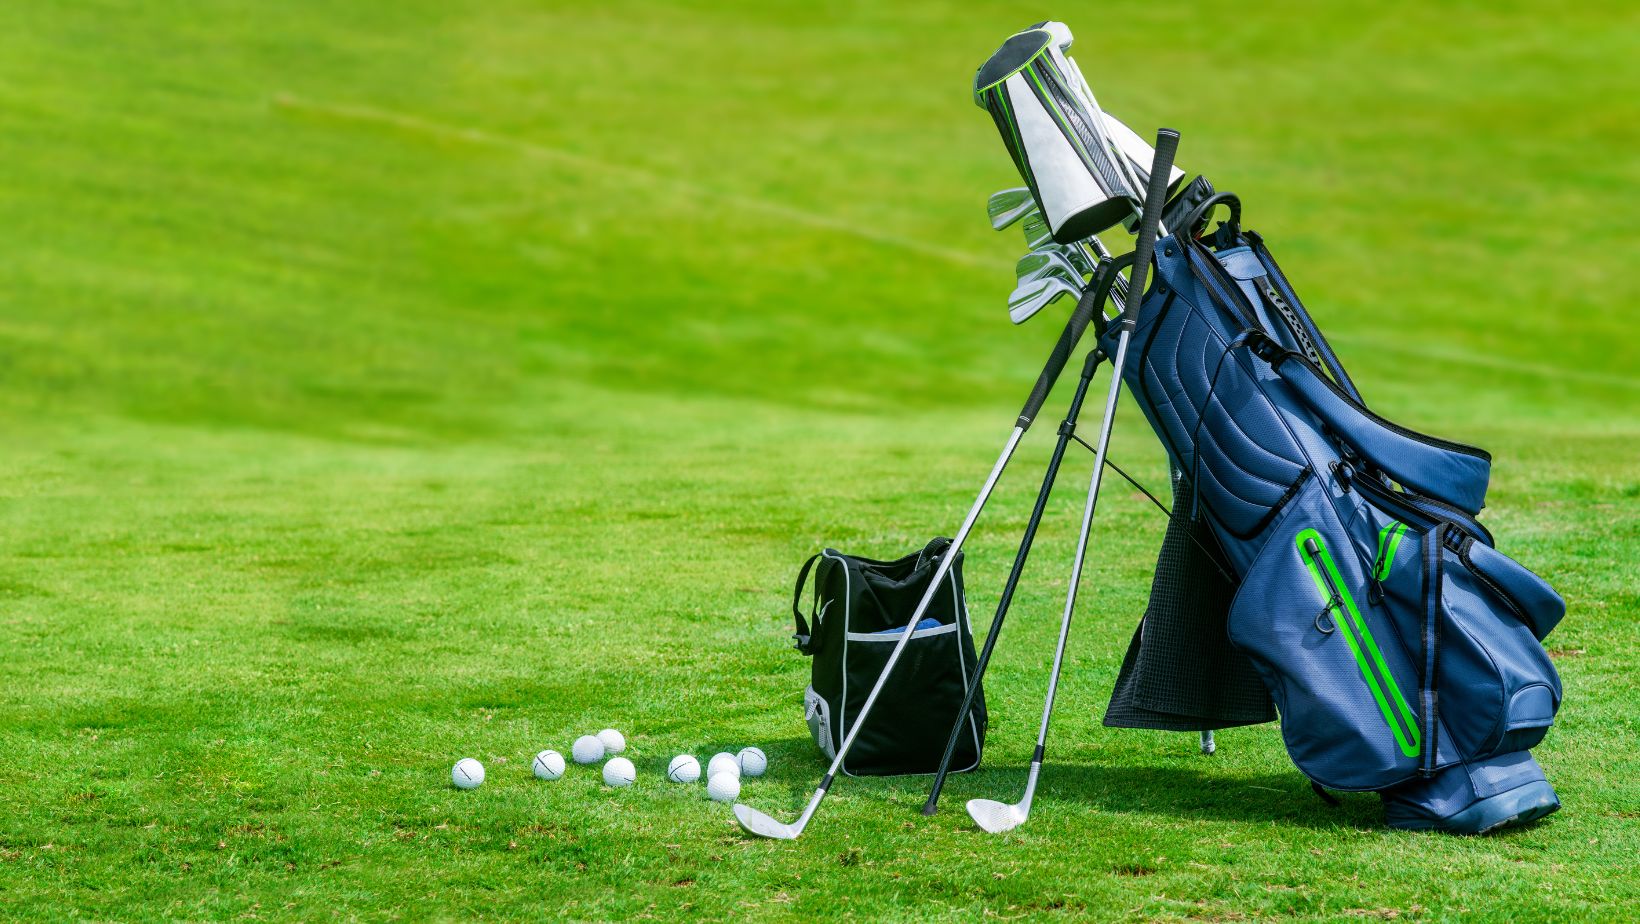 Choosing the Right Golf Simulator for Your Skill Level